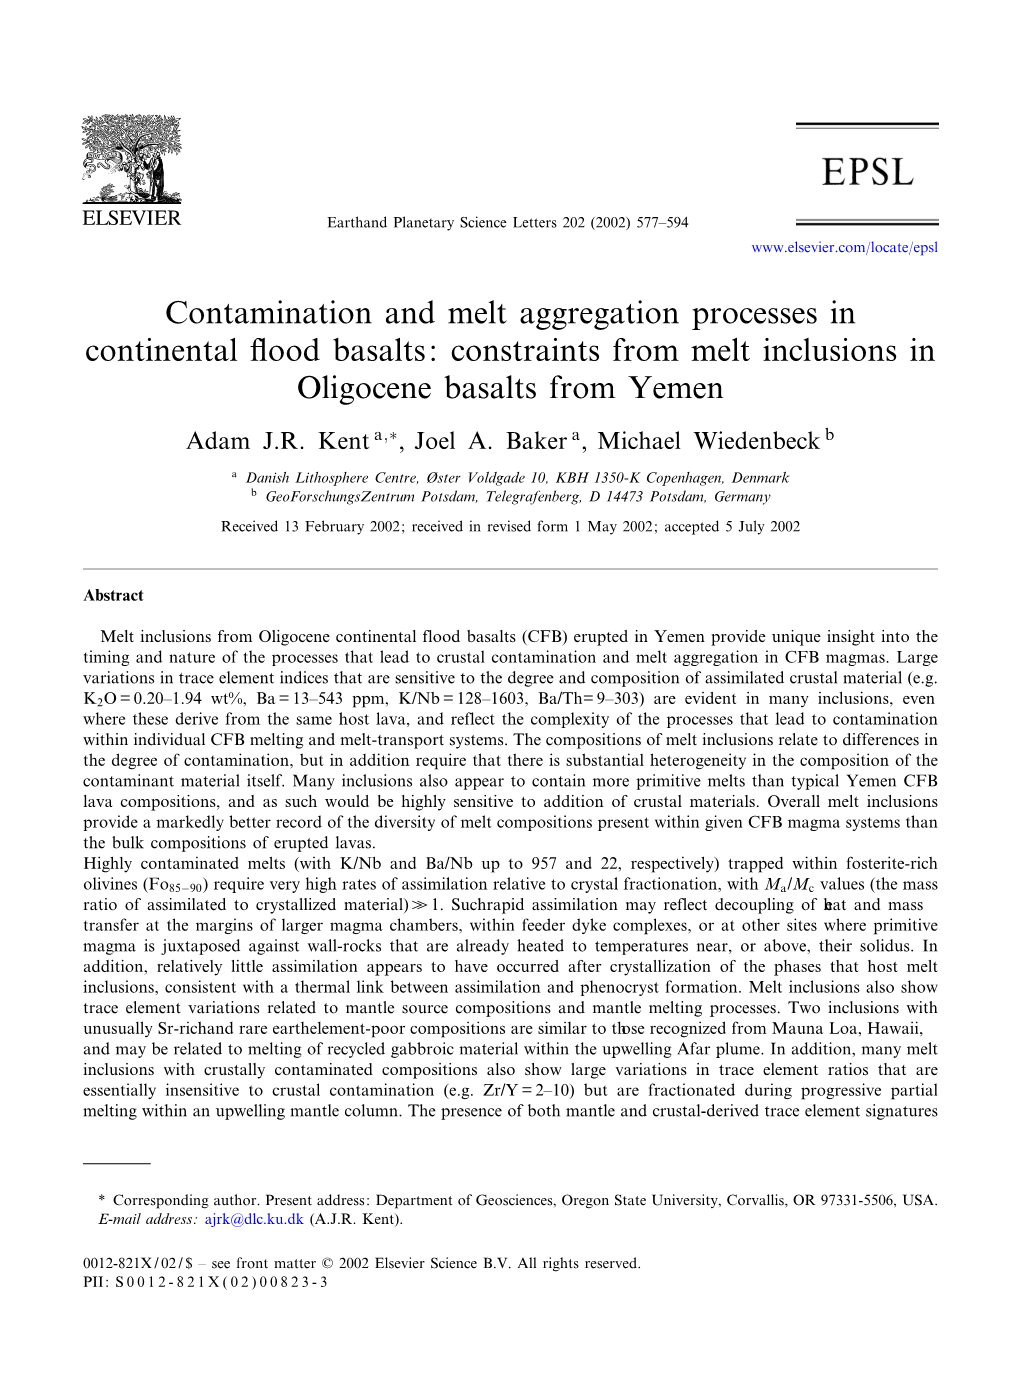 Contamination and Melt Aggregation Processes in Continental £Ood Basalts: Constraints from Melt Inclusions in Oligocene Basalts from Yemen